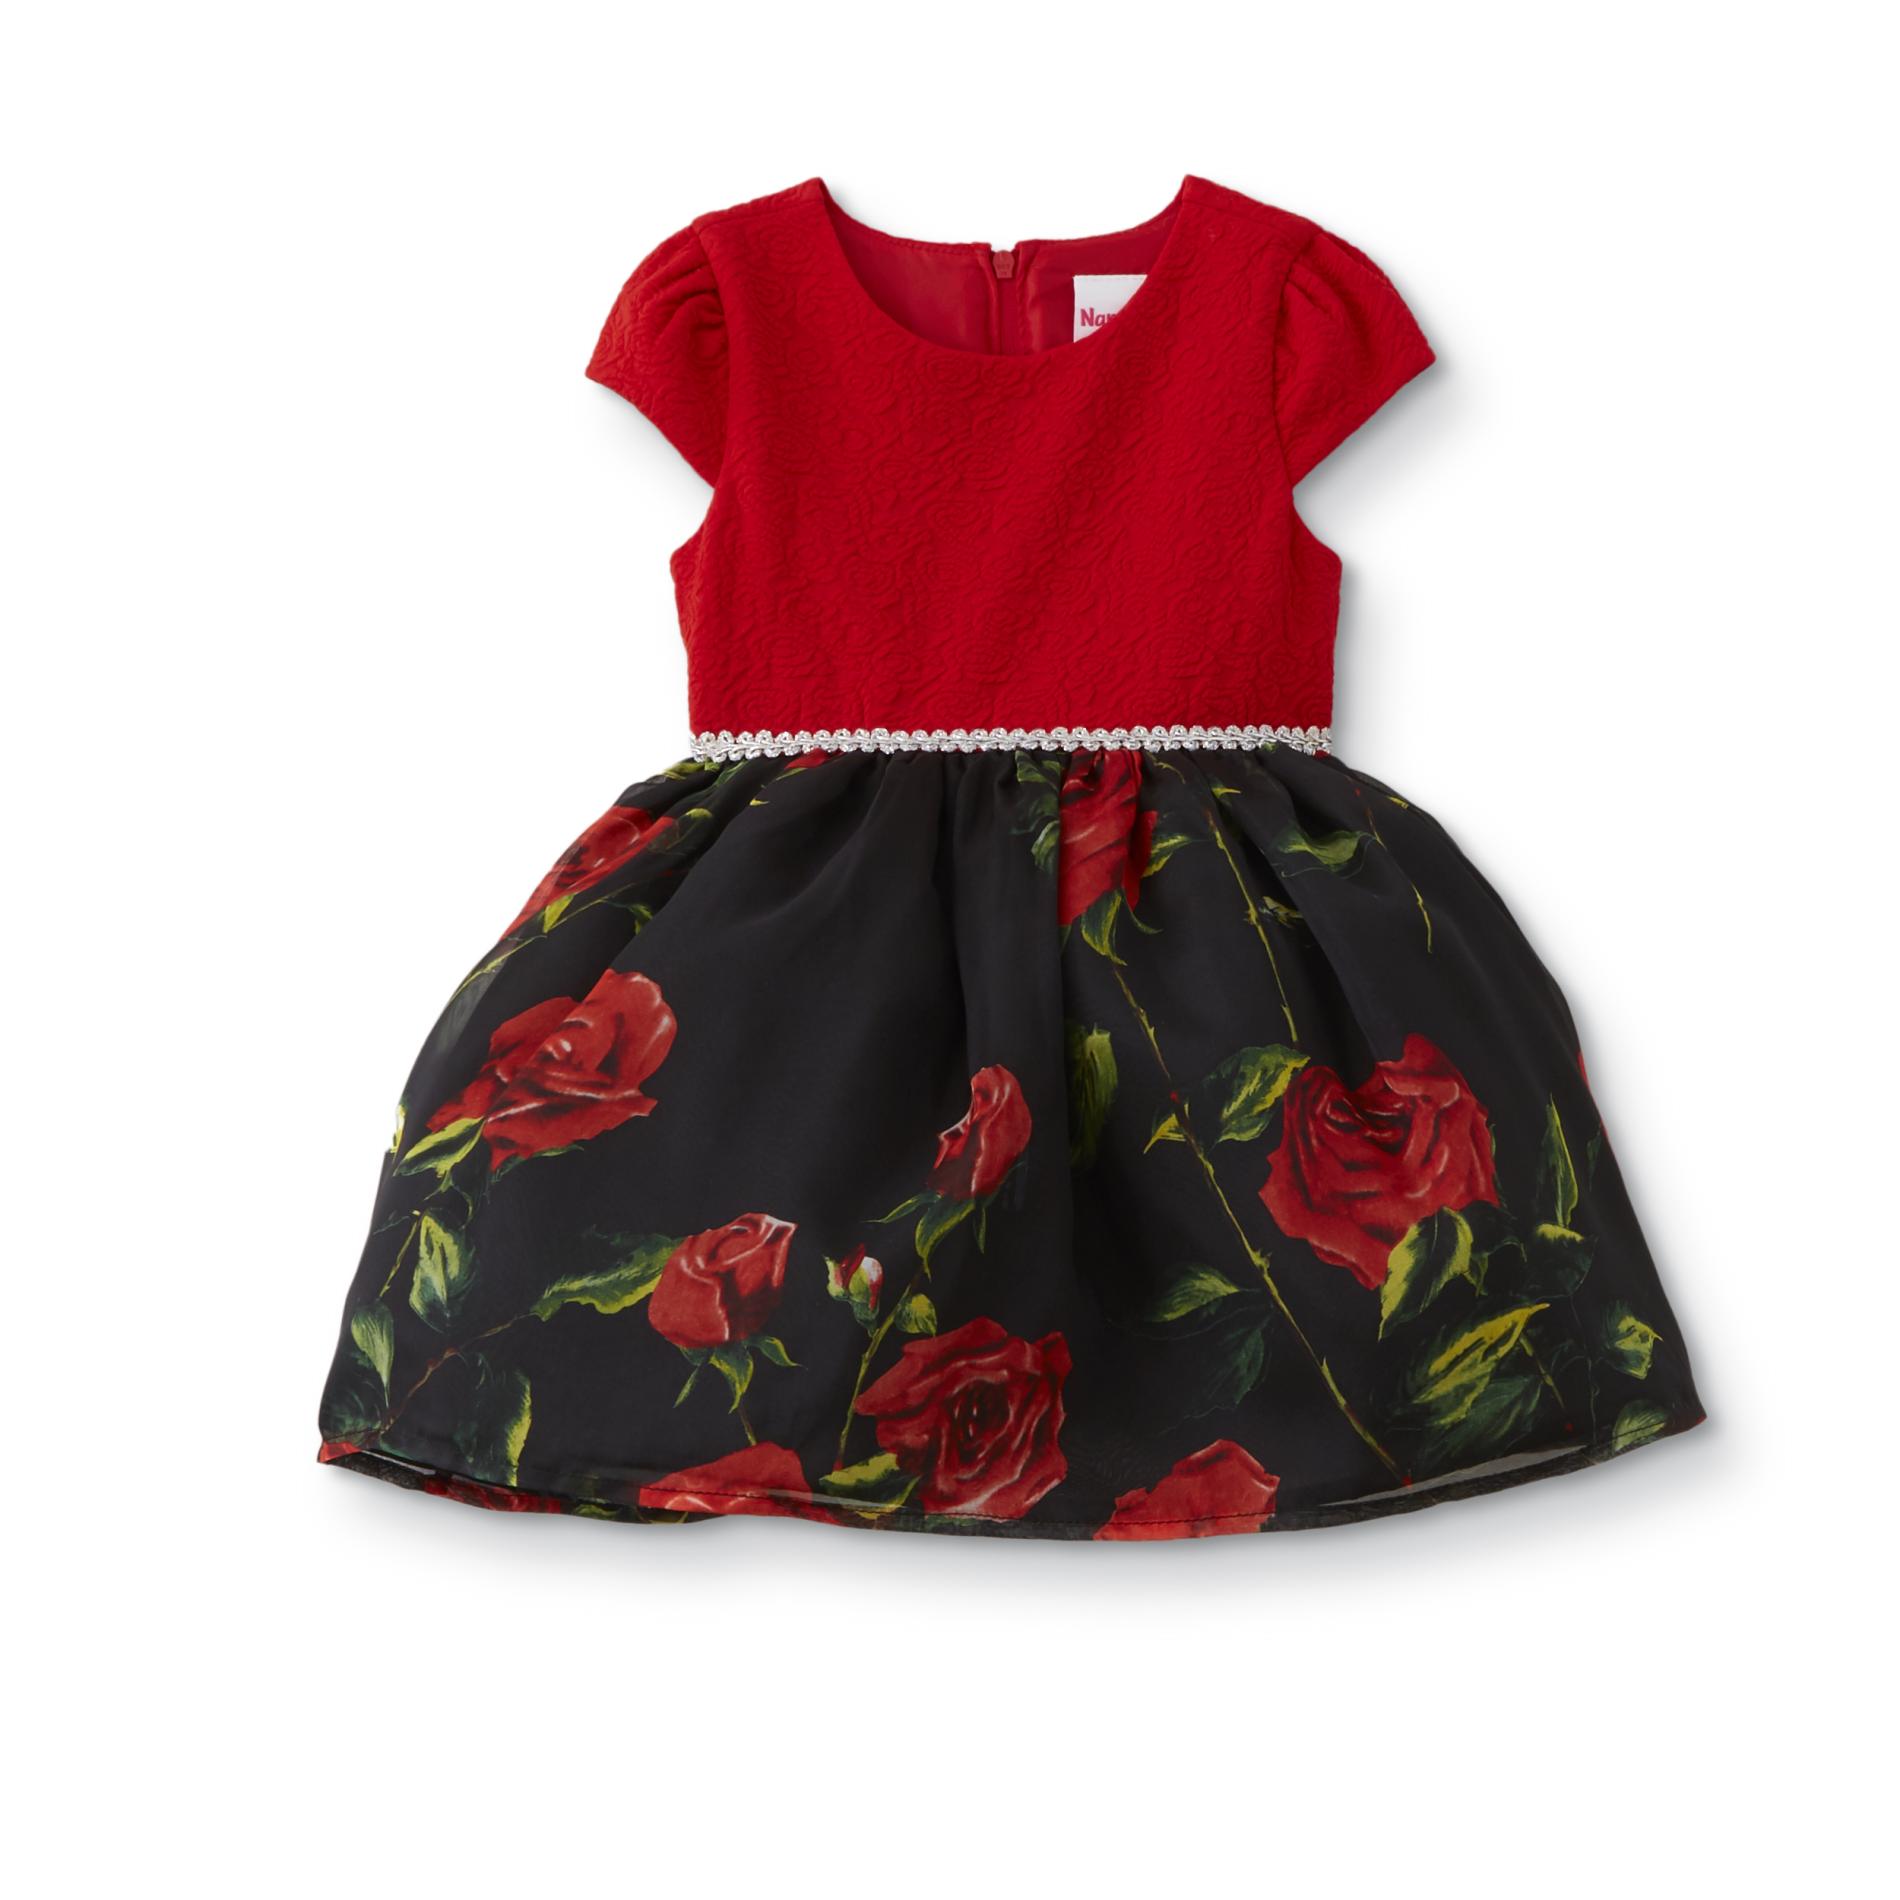 children's and infants wear stores